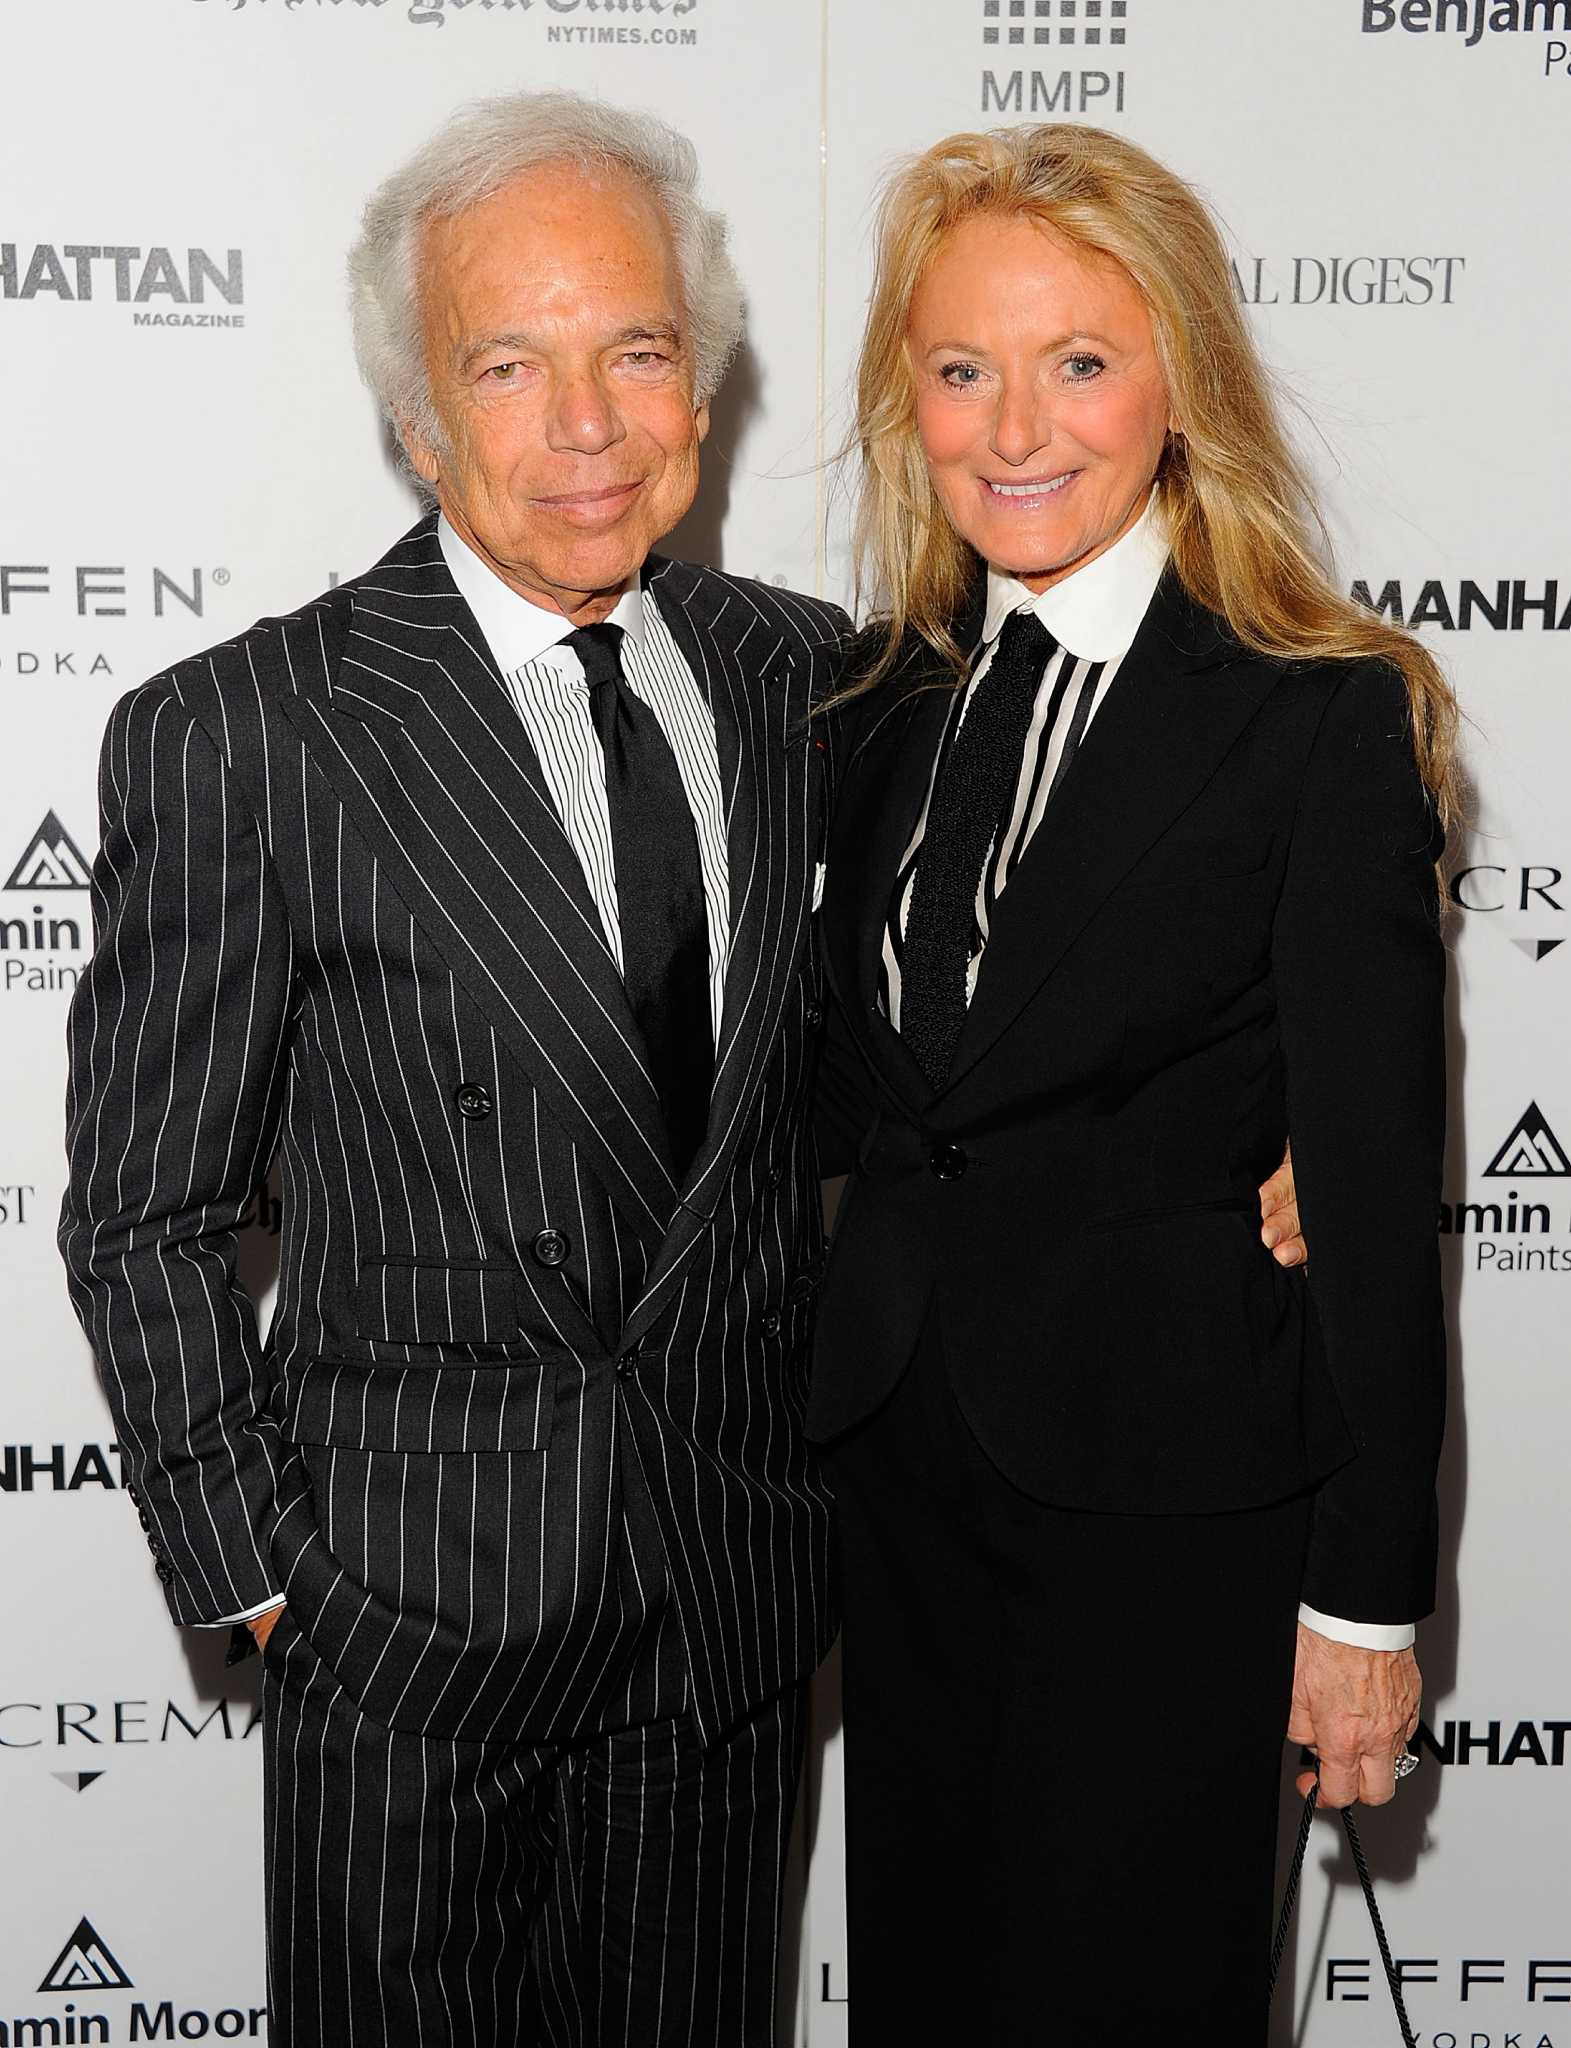 Ralph Lauren and wife Ricky touch down in New York City